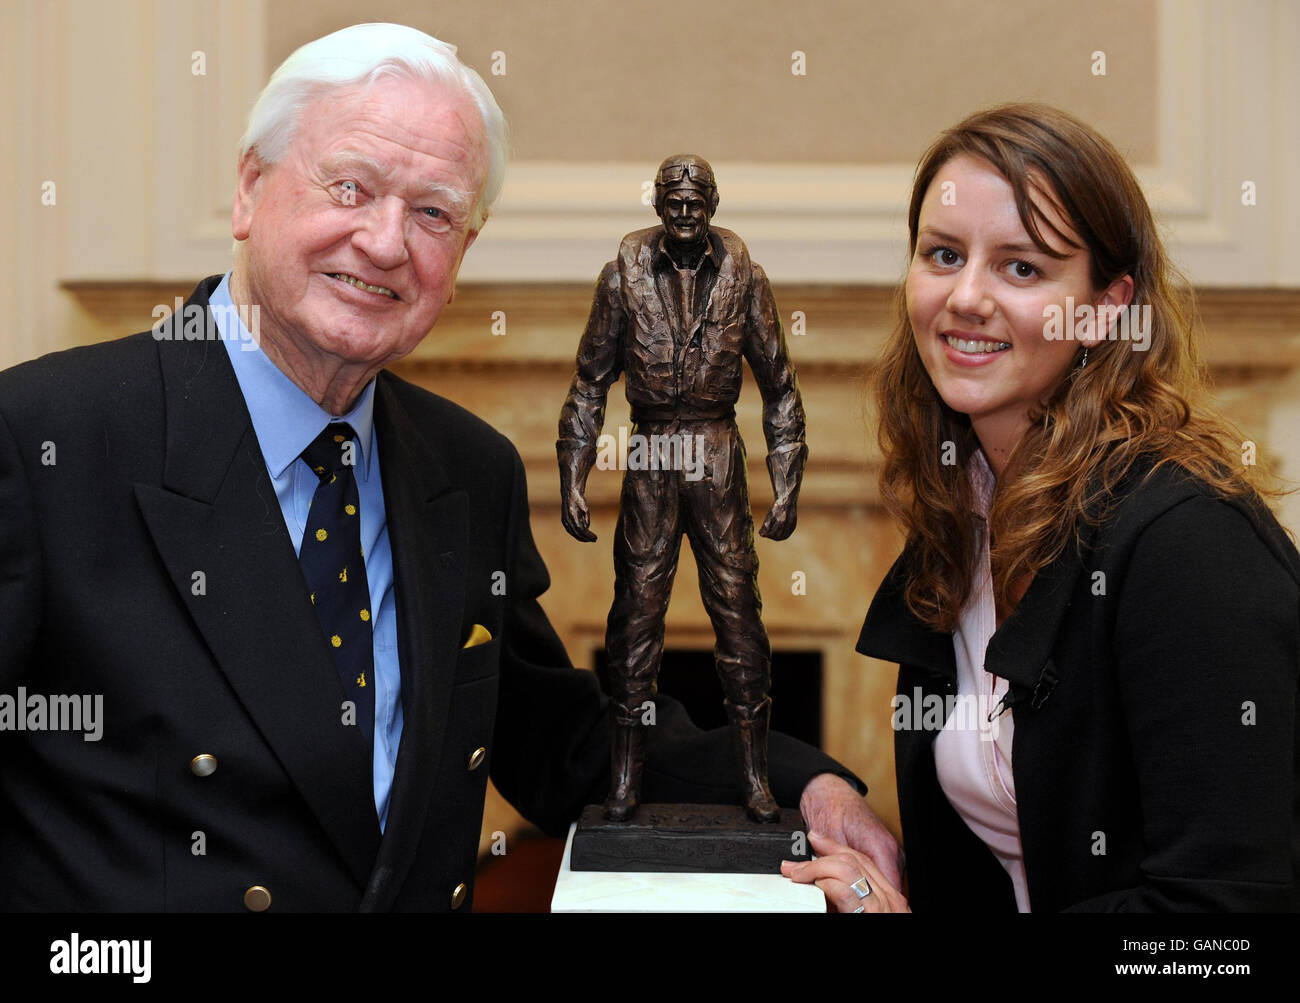 Battle of Britain pilot, Wing Commander Tom Neil and great-great neice Leigh Park at the RAF Club, Piccadilly, London standing next to a model for a statue of Battle of Britain RAF hero, Sir Keith Park, a New Zealander. Stock Photo